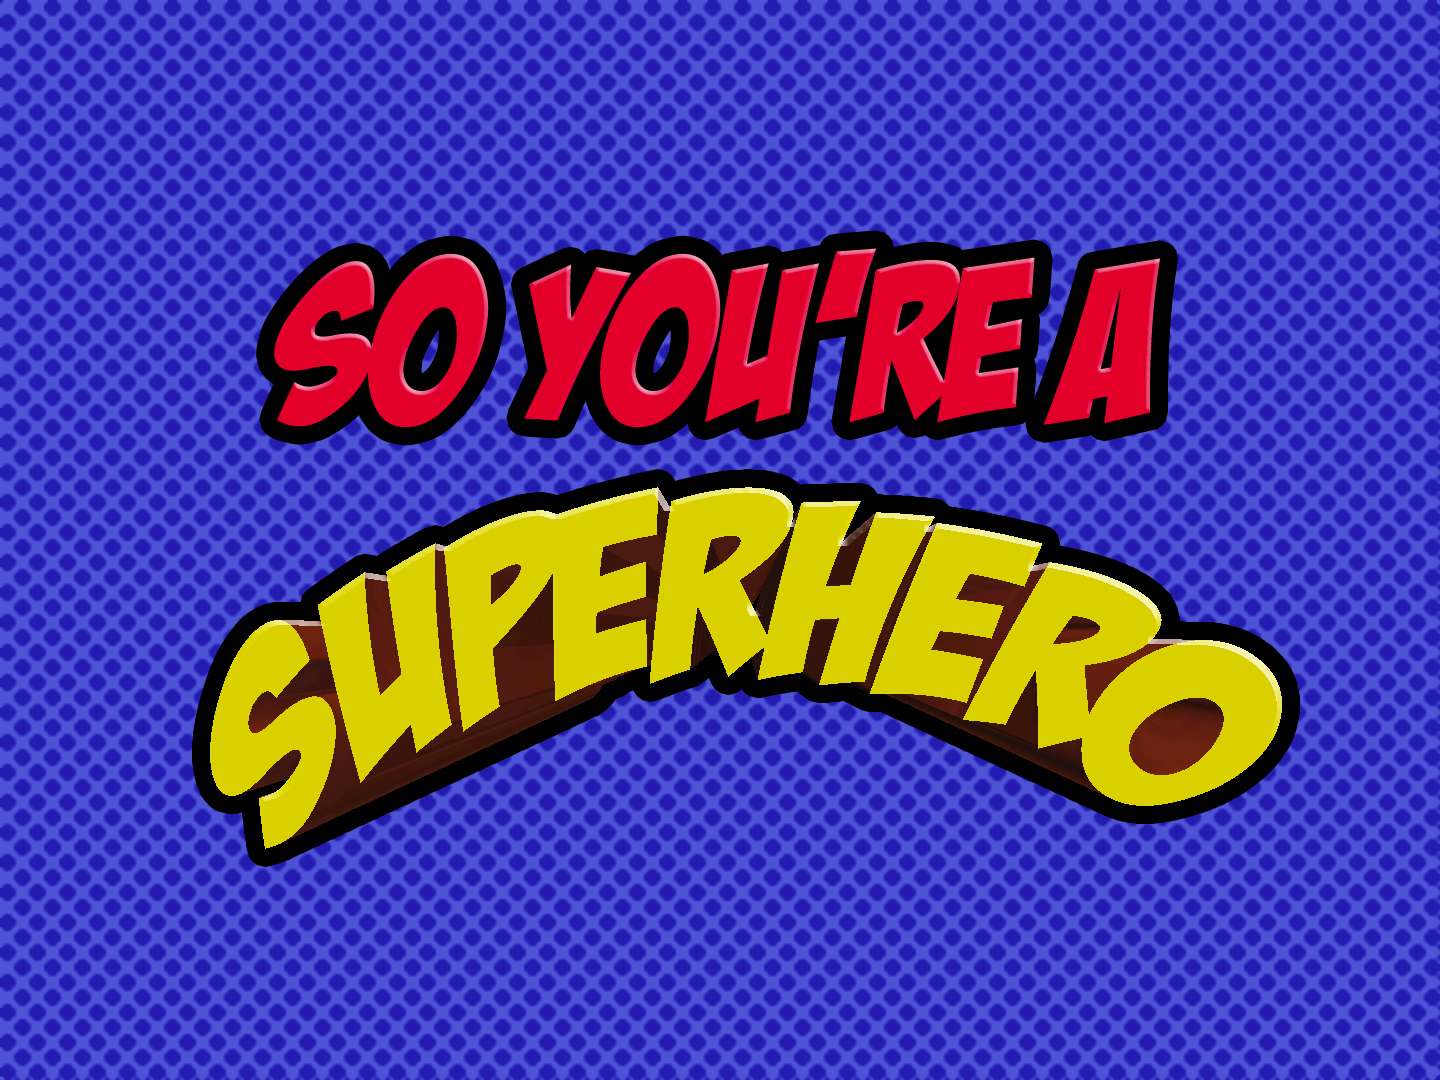 What superhero are you? | PlayBuzz